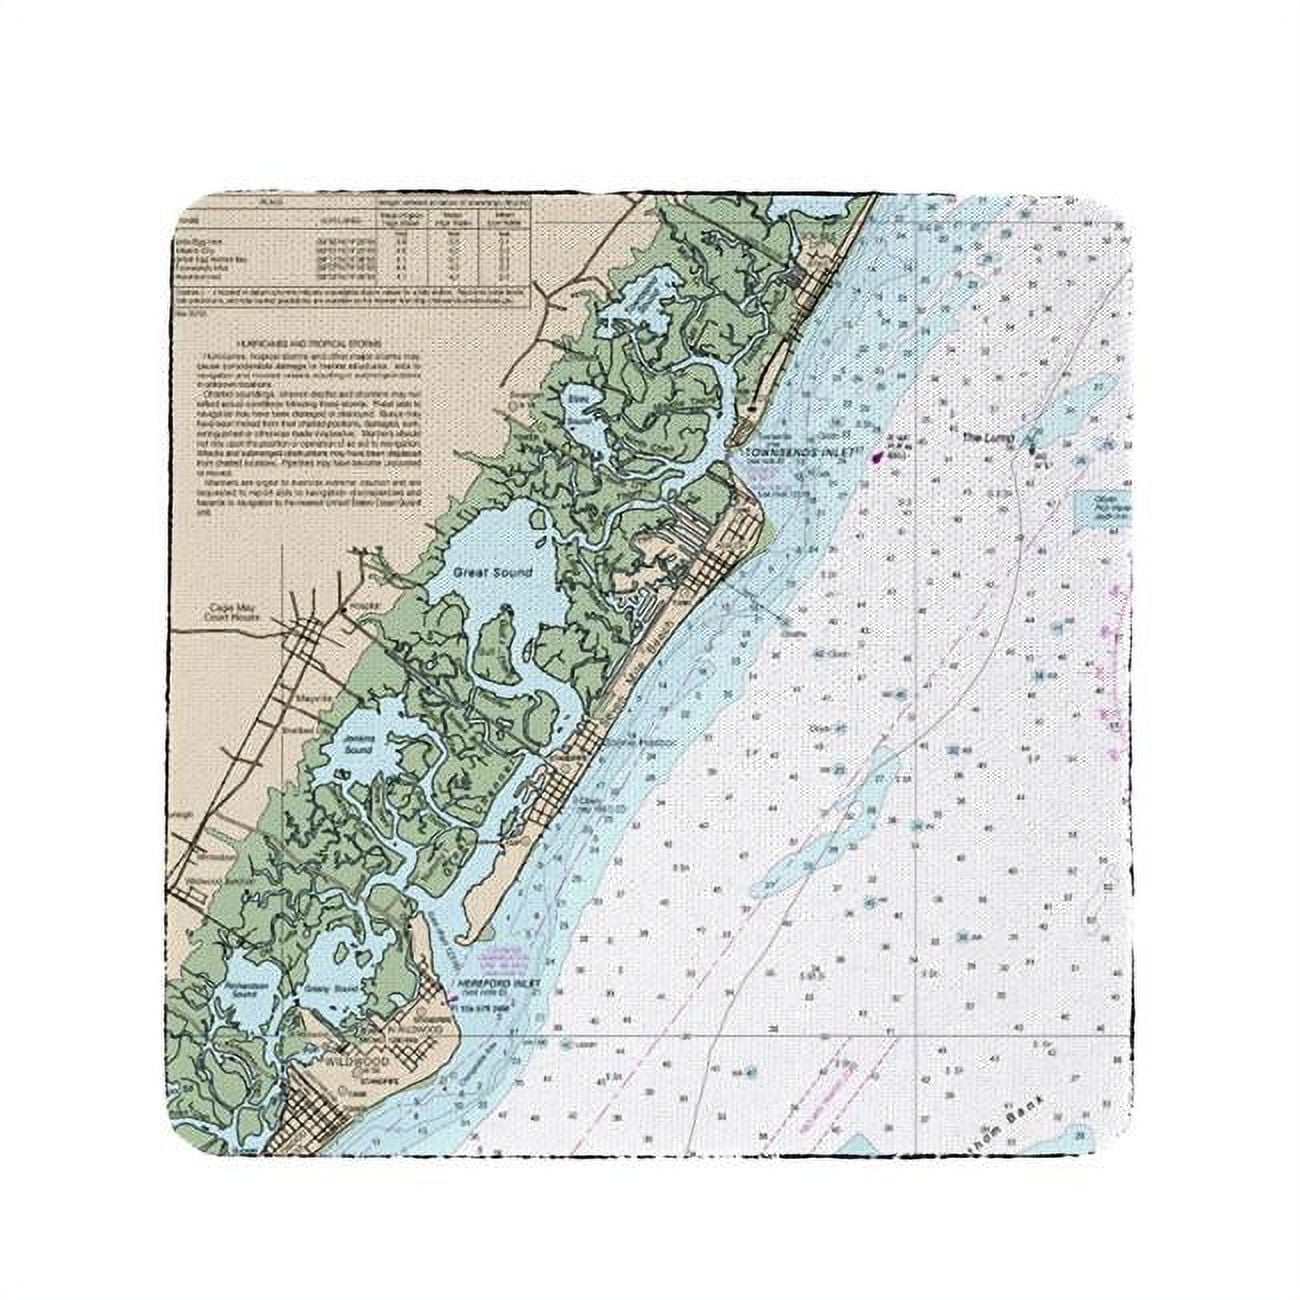 Ct12318av 4 X 4 In. Little Egg Inlet To Hereford Inlet - Avalon, Nh Nautical Map Coaster - Set Of 4